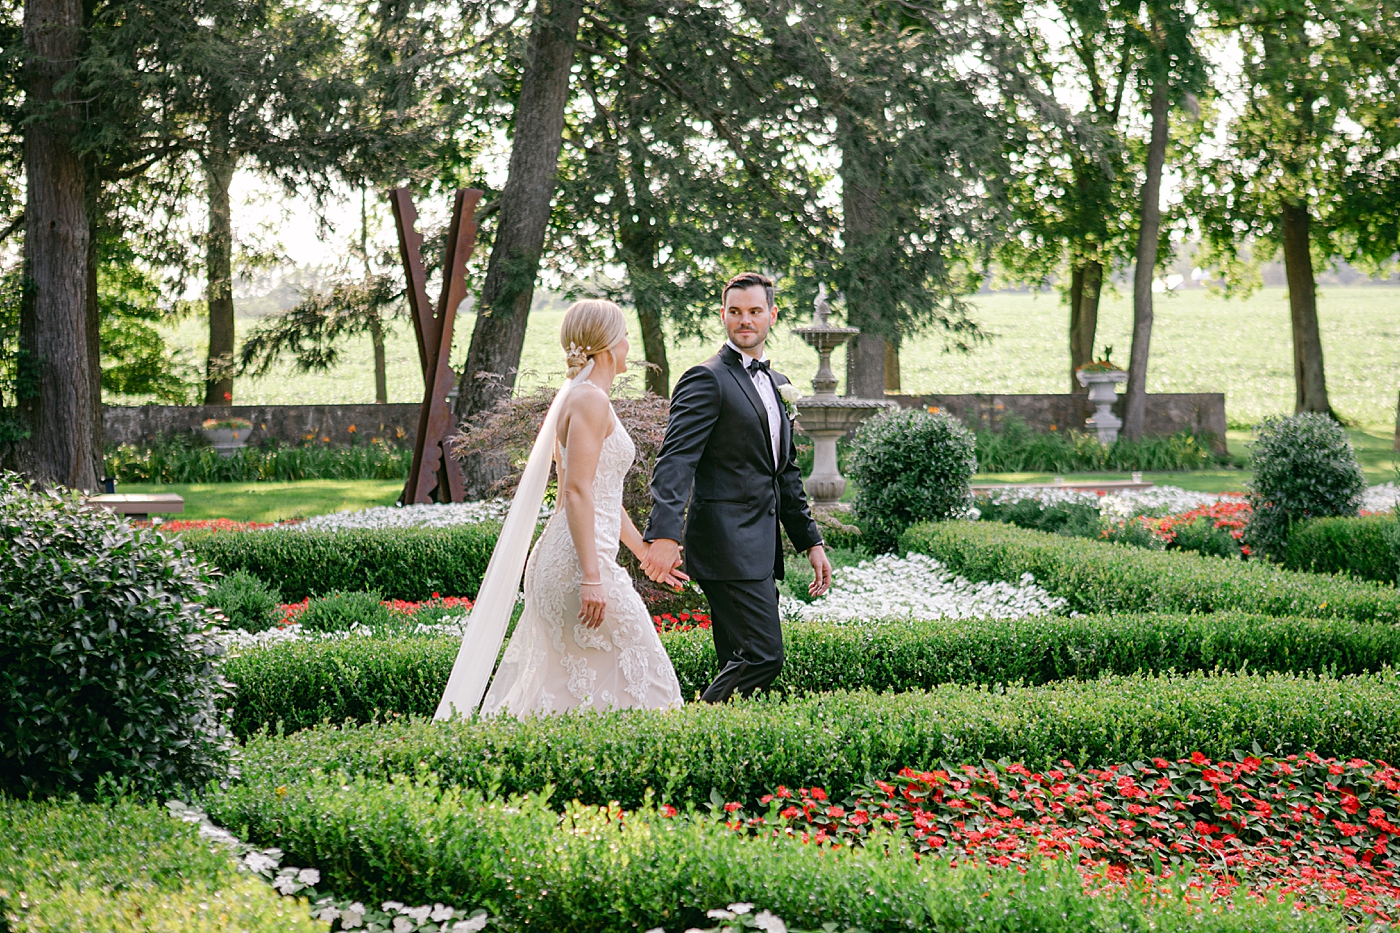 Bride and groom walking through a garden holding hands | Image by Hope Helmuth Photography